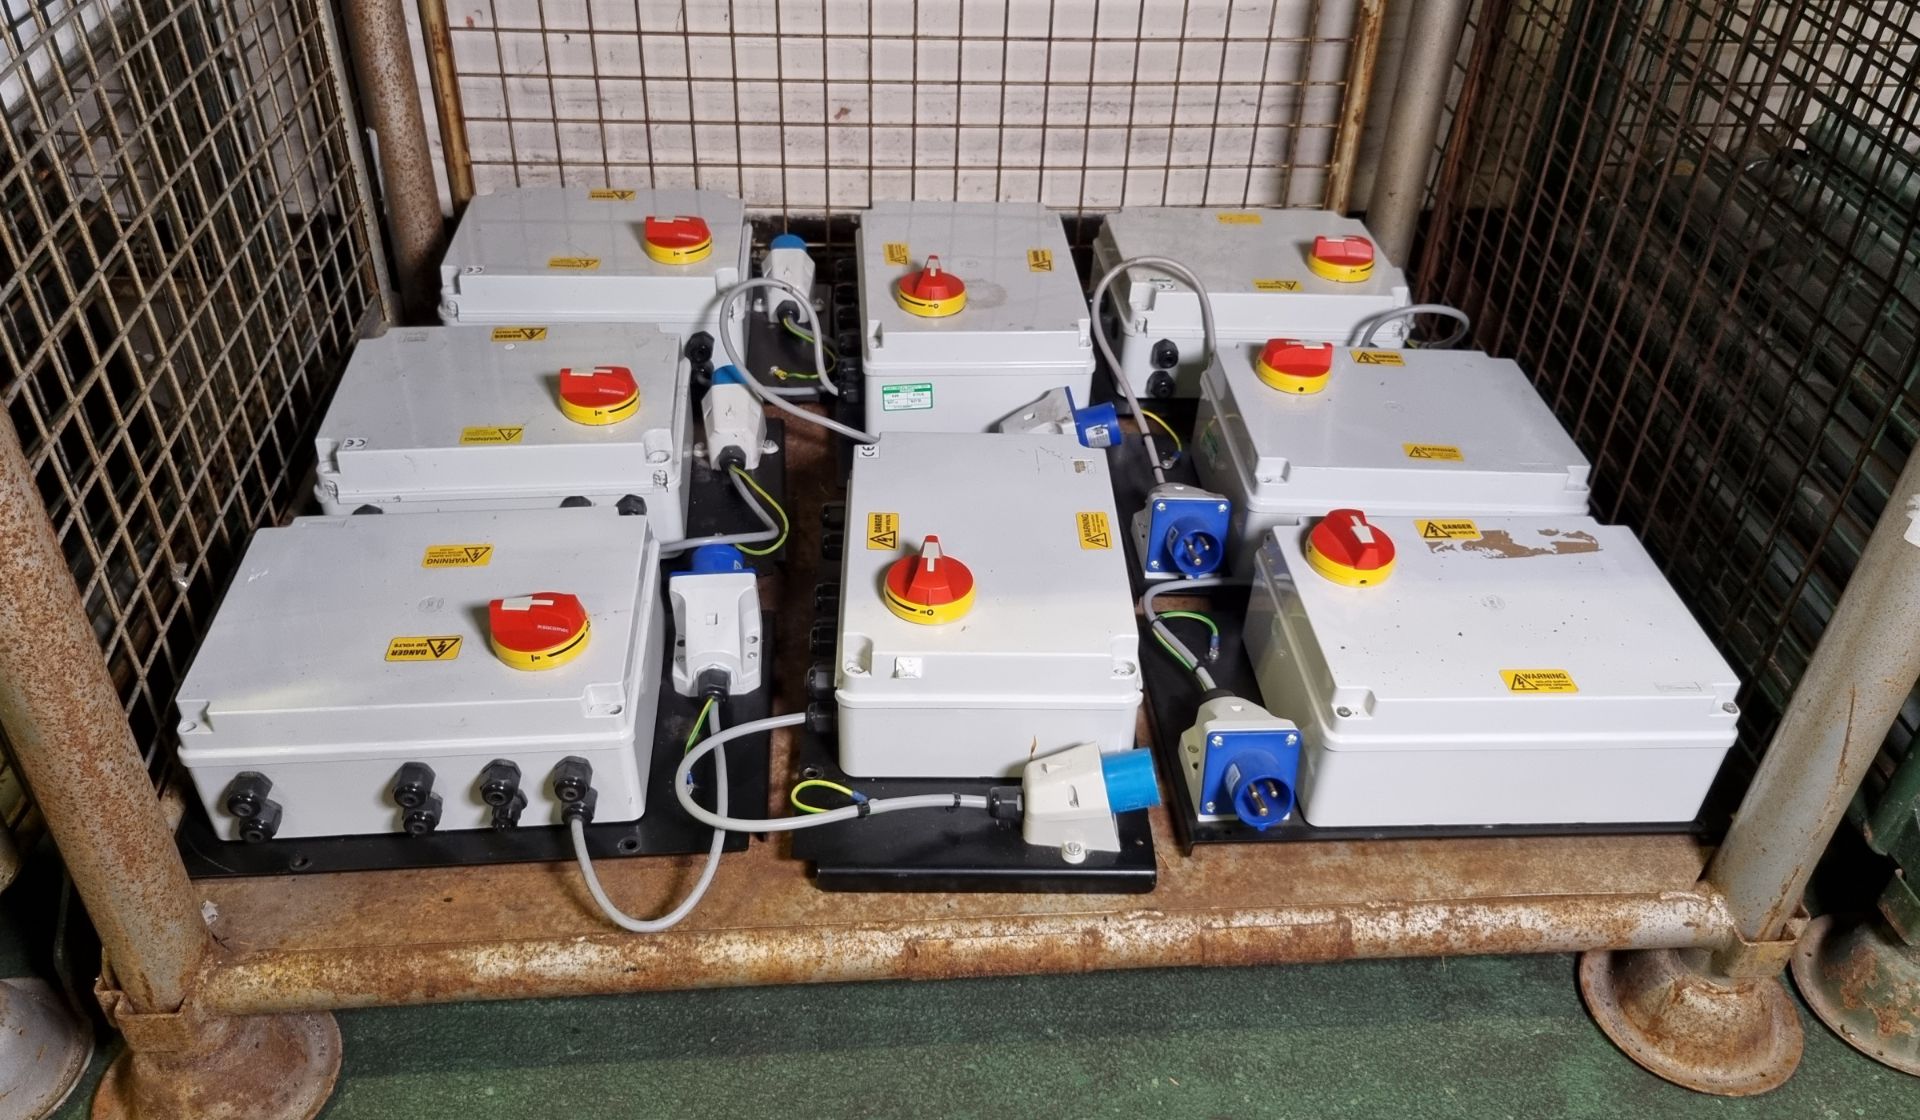 8x Socomec multiple output master switch boxes